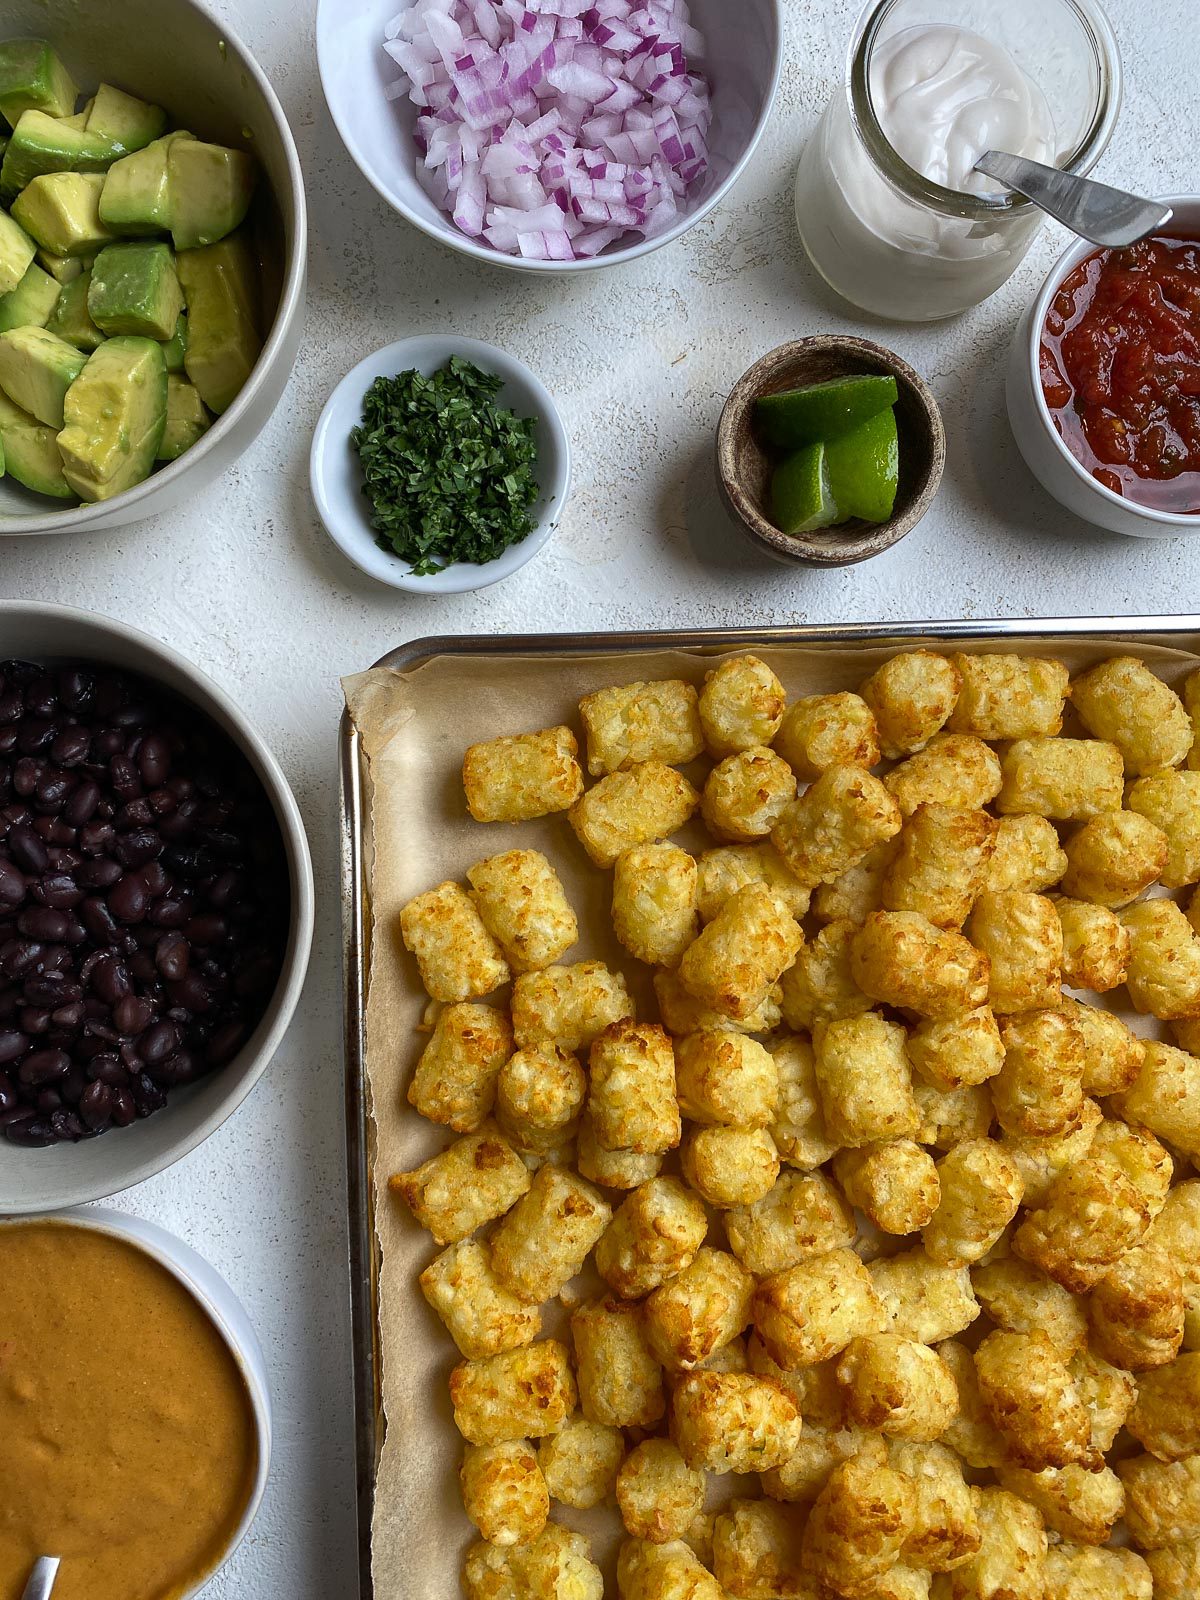 ingredients for Totchos measured out on a white surface